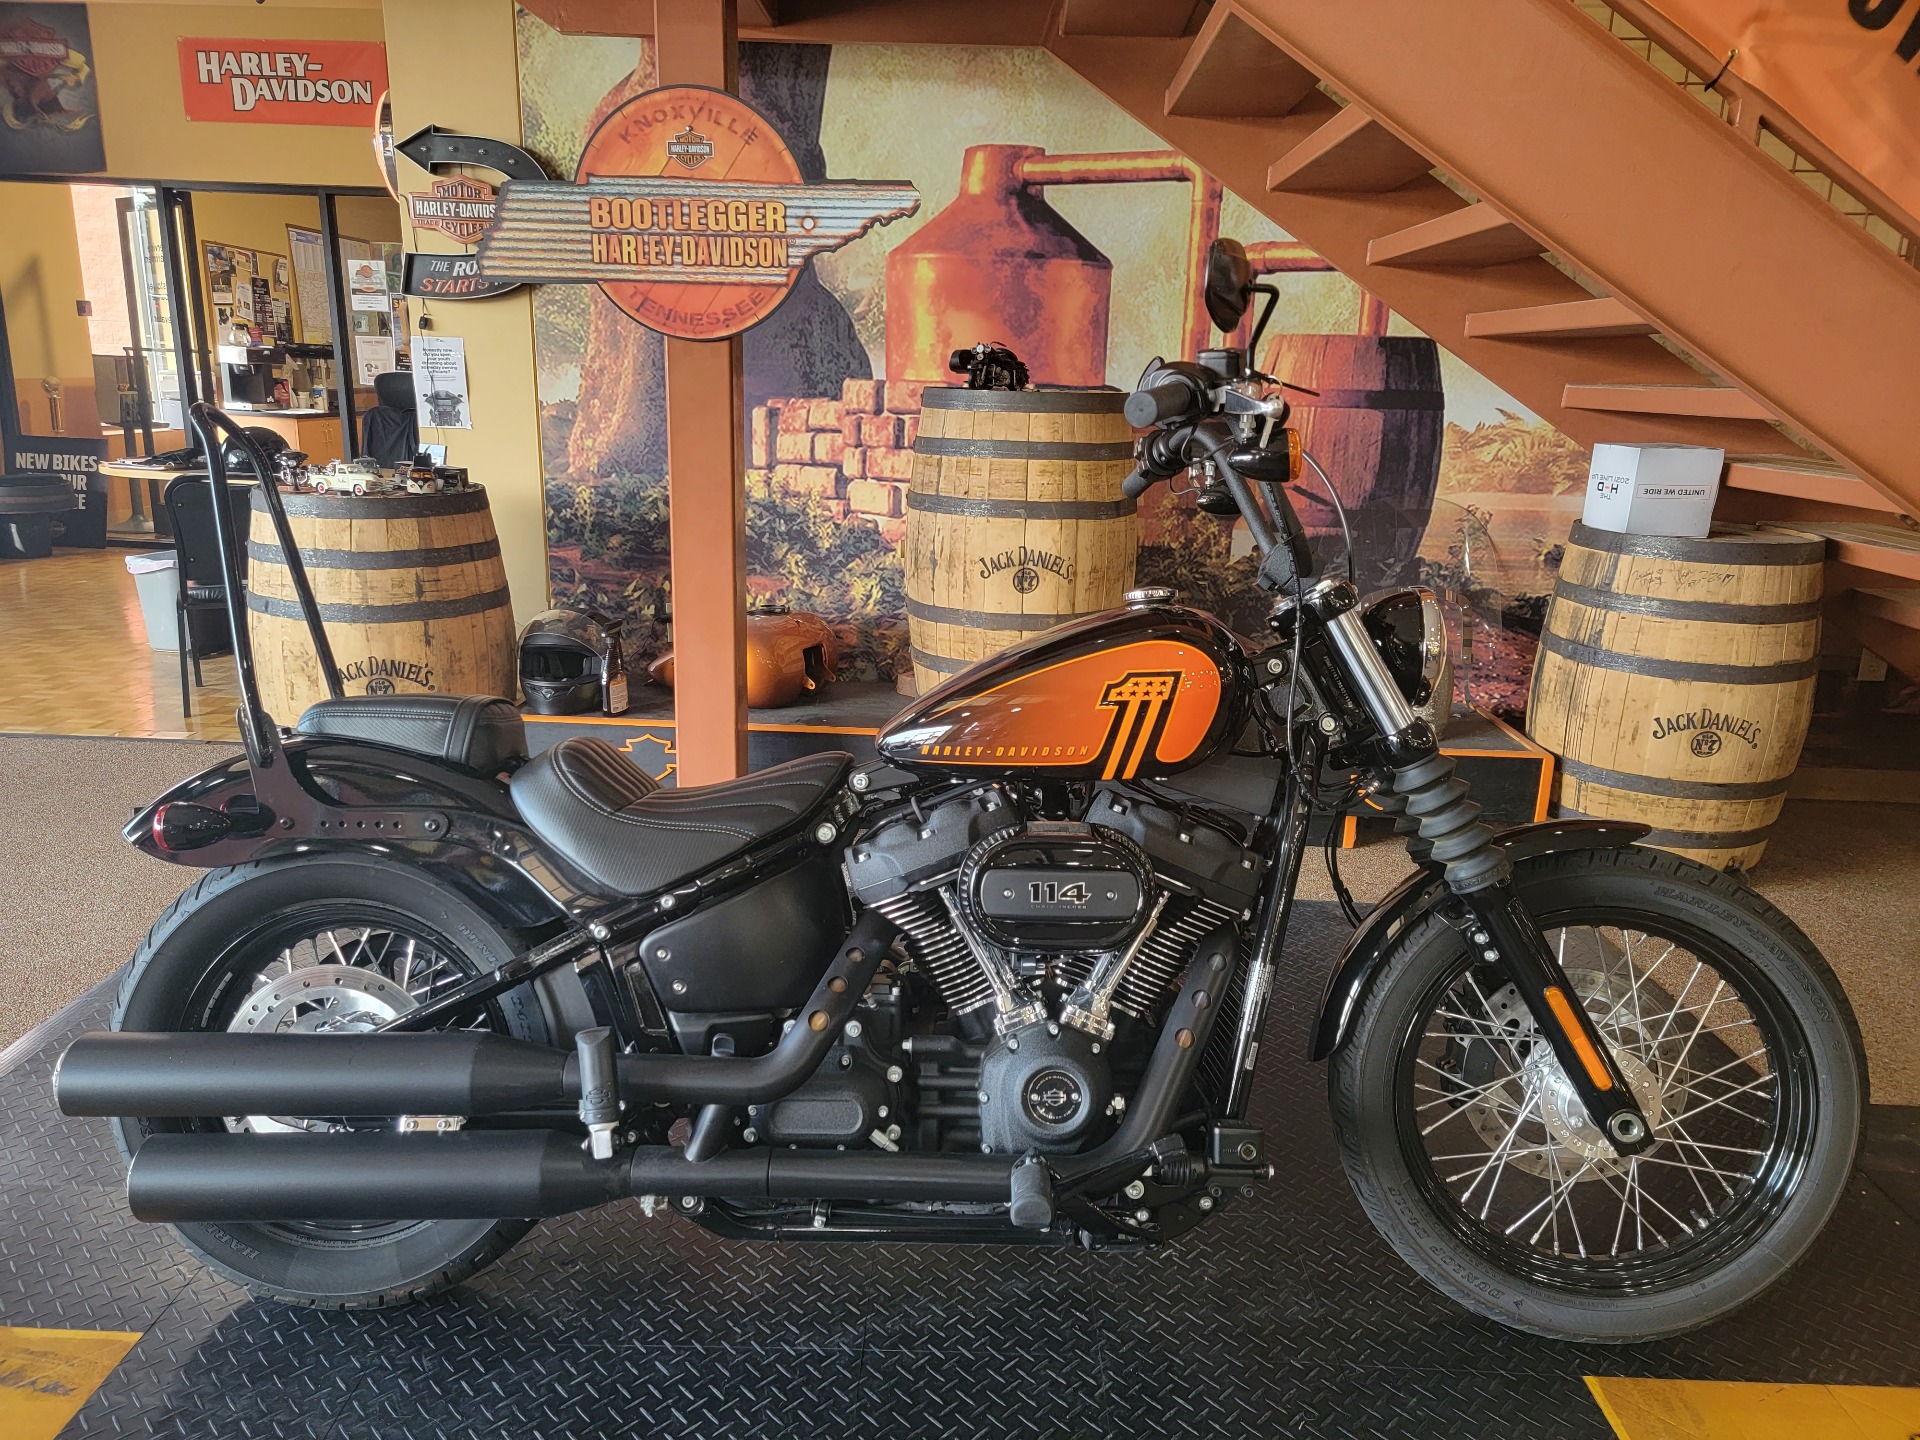 2021 Harley-Davidson Street Bob® 114 in Knoxville, Tennessee - Photo 1